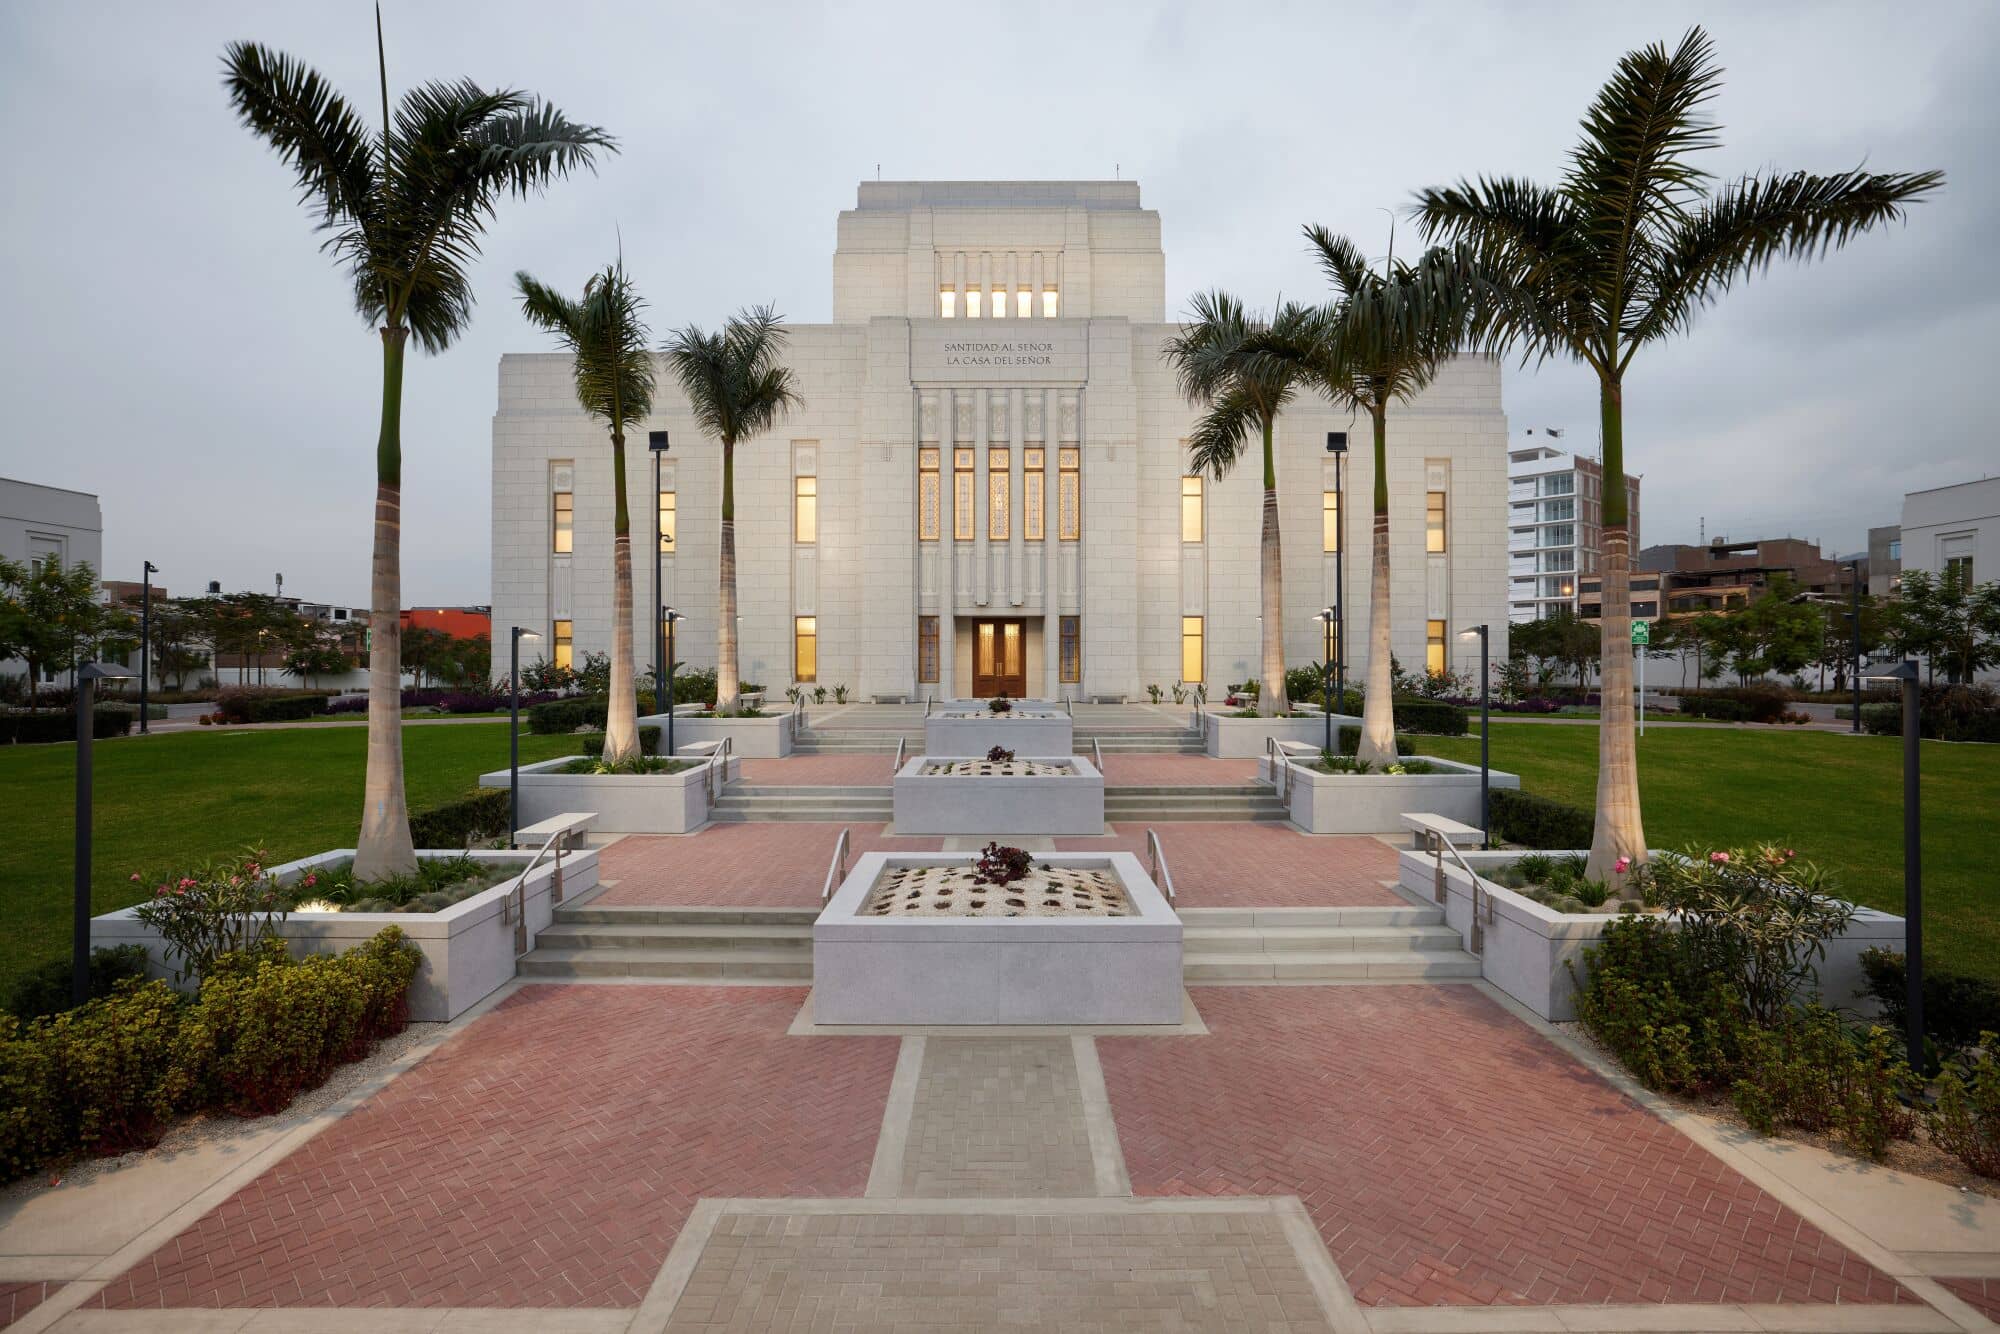 The exterior of the Lima Peru Los Olivos Temple, a light-gray building with long, rectangular windows and a flat-roofed tower.